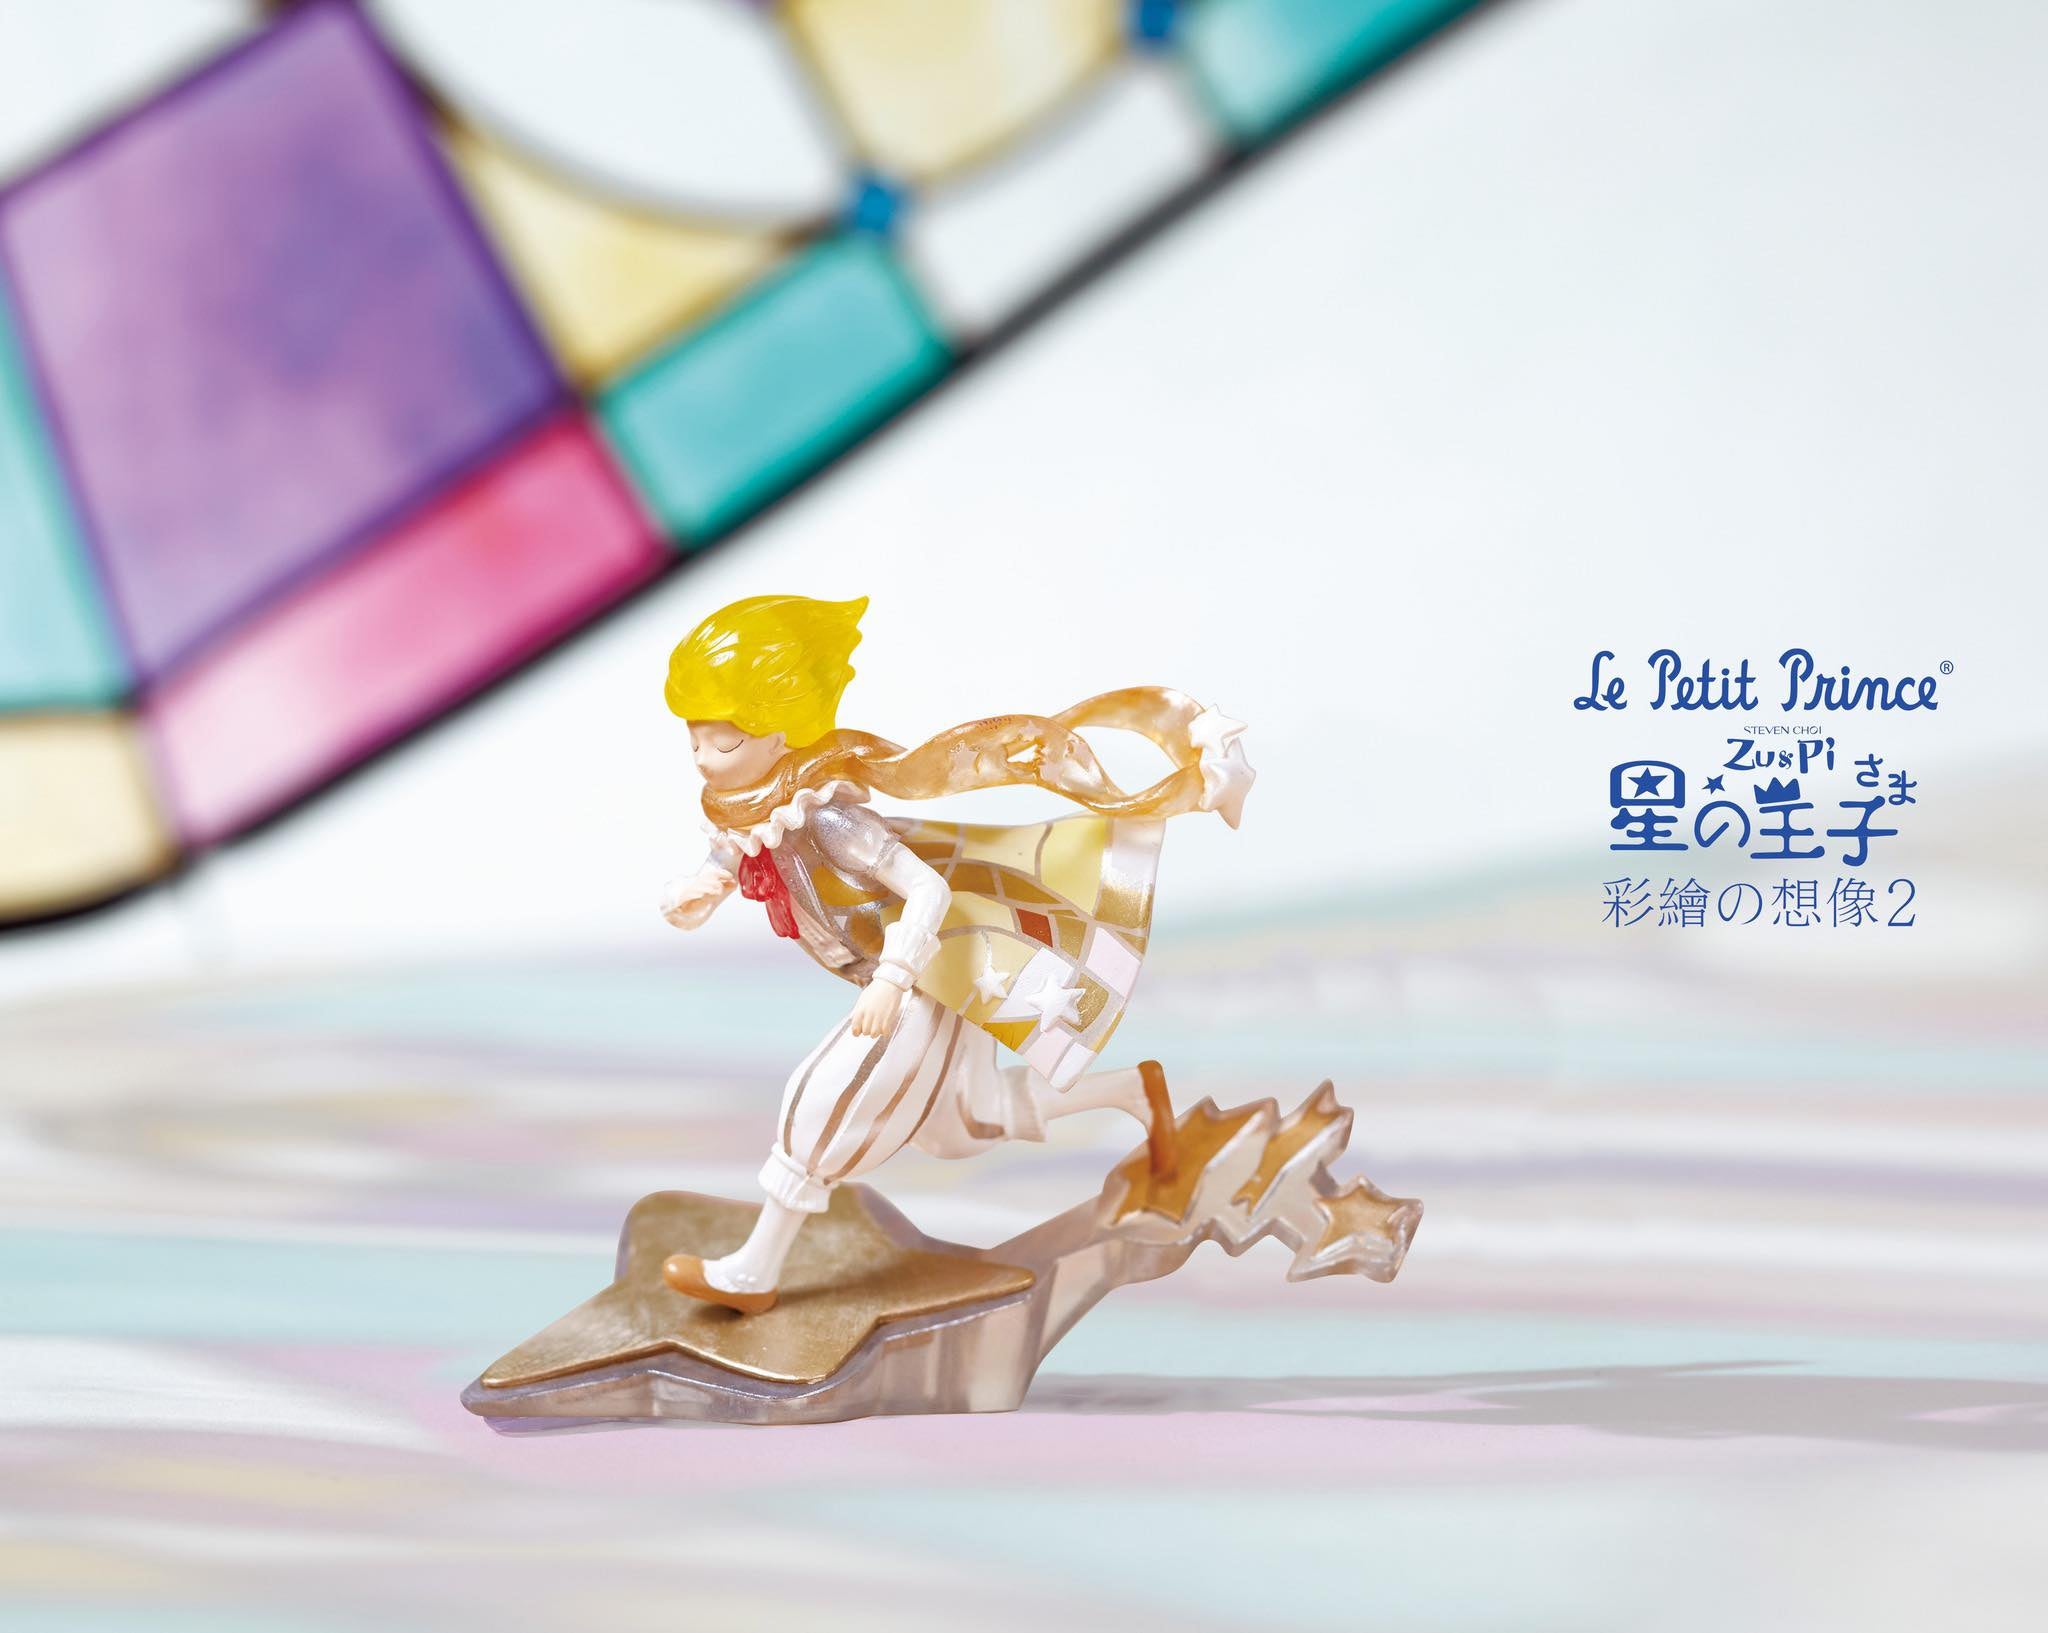 The Little Prince Vol. 4 - Stained Glass Special Edition by Zu & Pi - Preorder